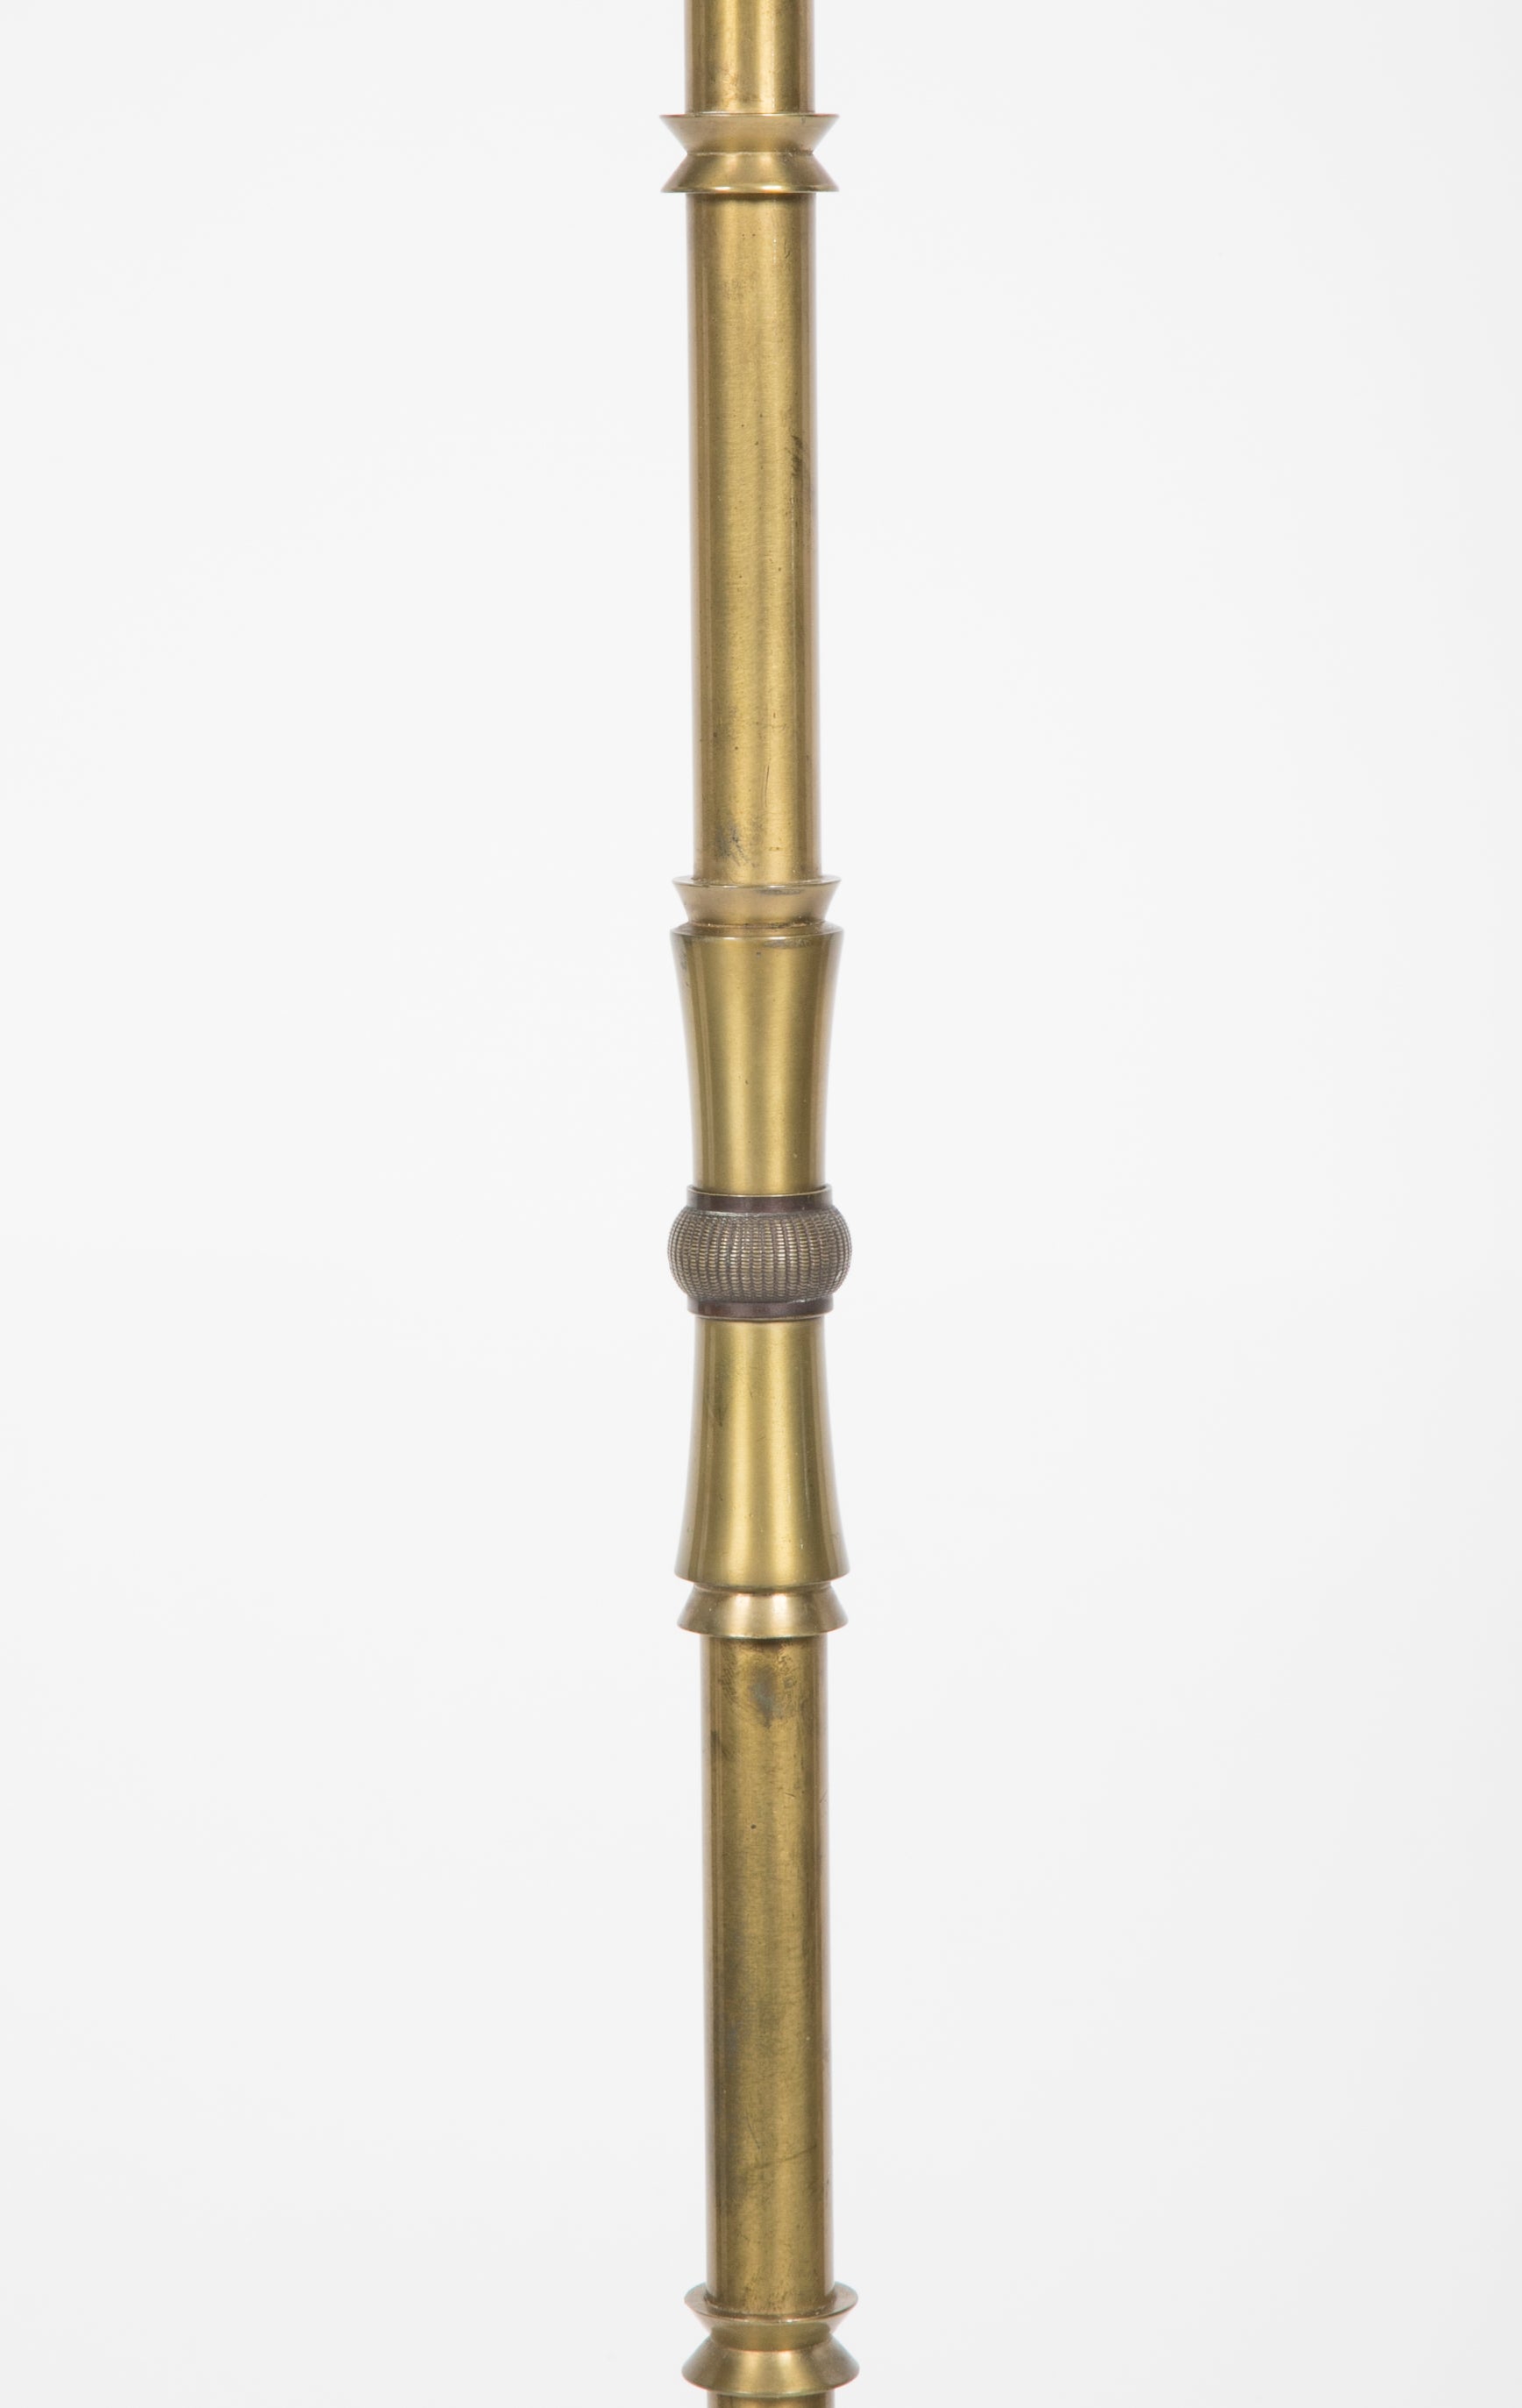 Domestic service covered brass faux bamboo